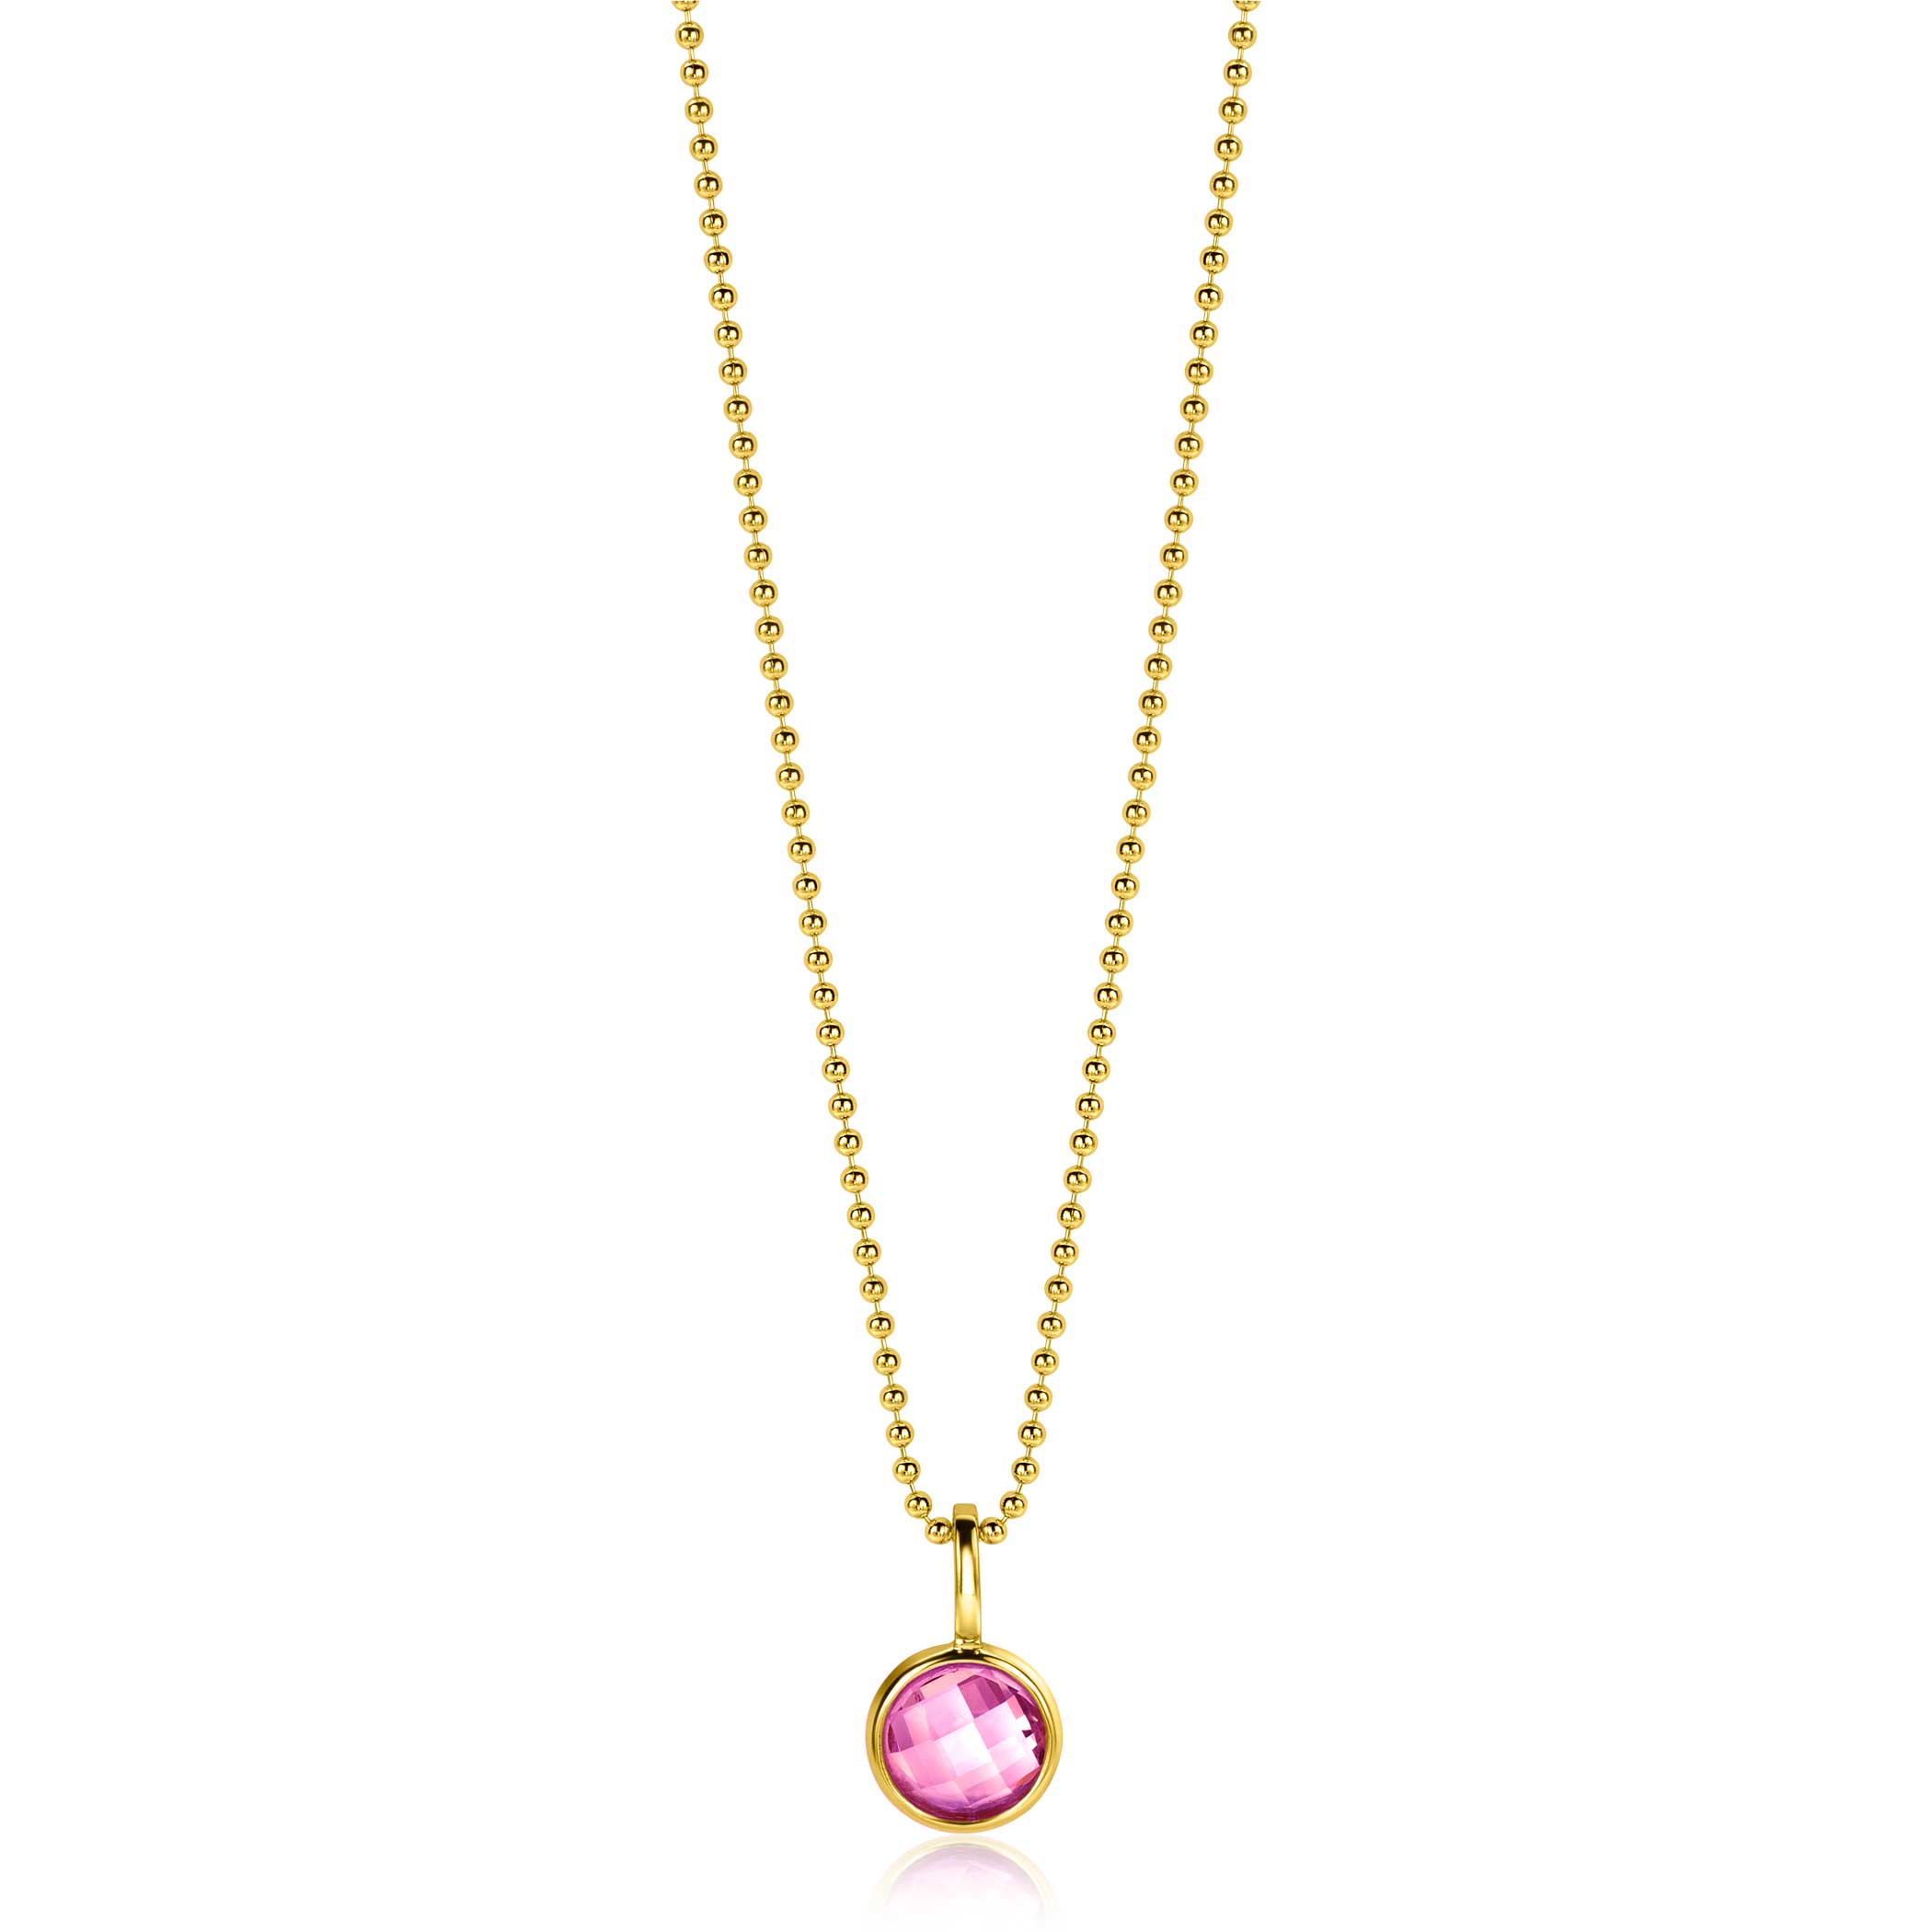 OCTOBER Pendant 8mm Gold Plated Birthstone Pink Rose Quartz Zirconia (excl. necklace)